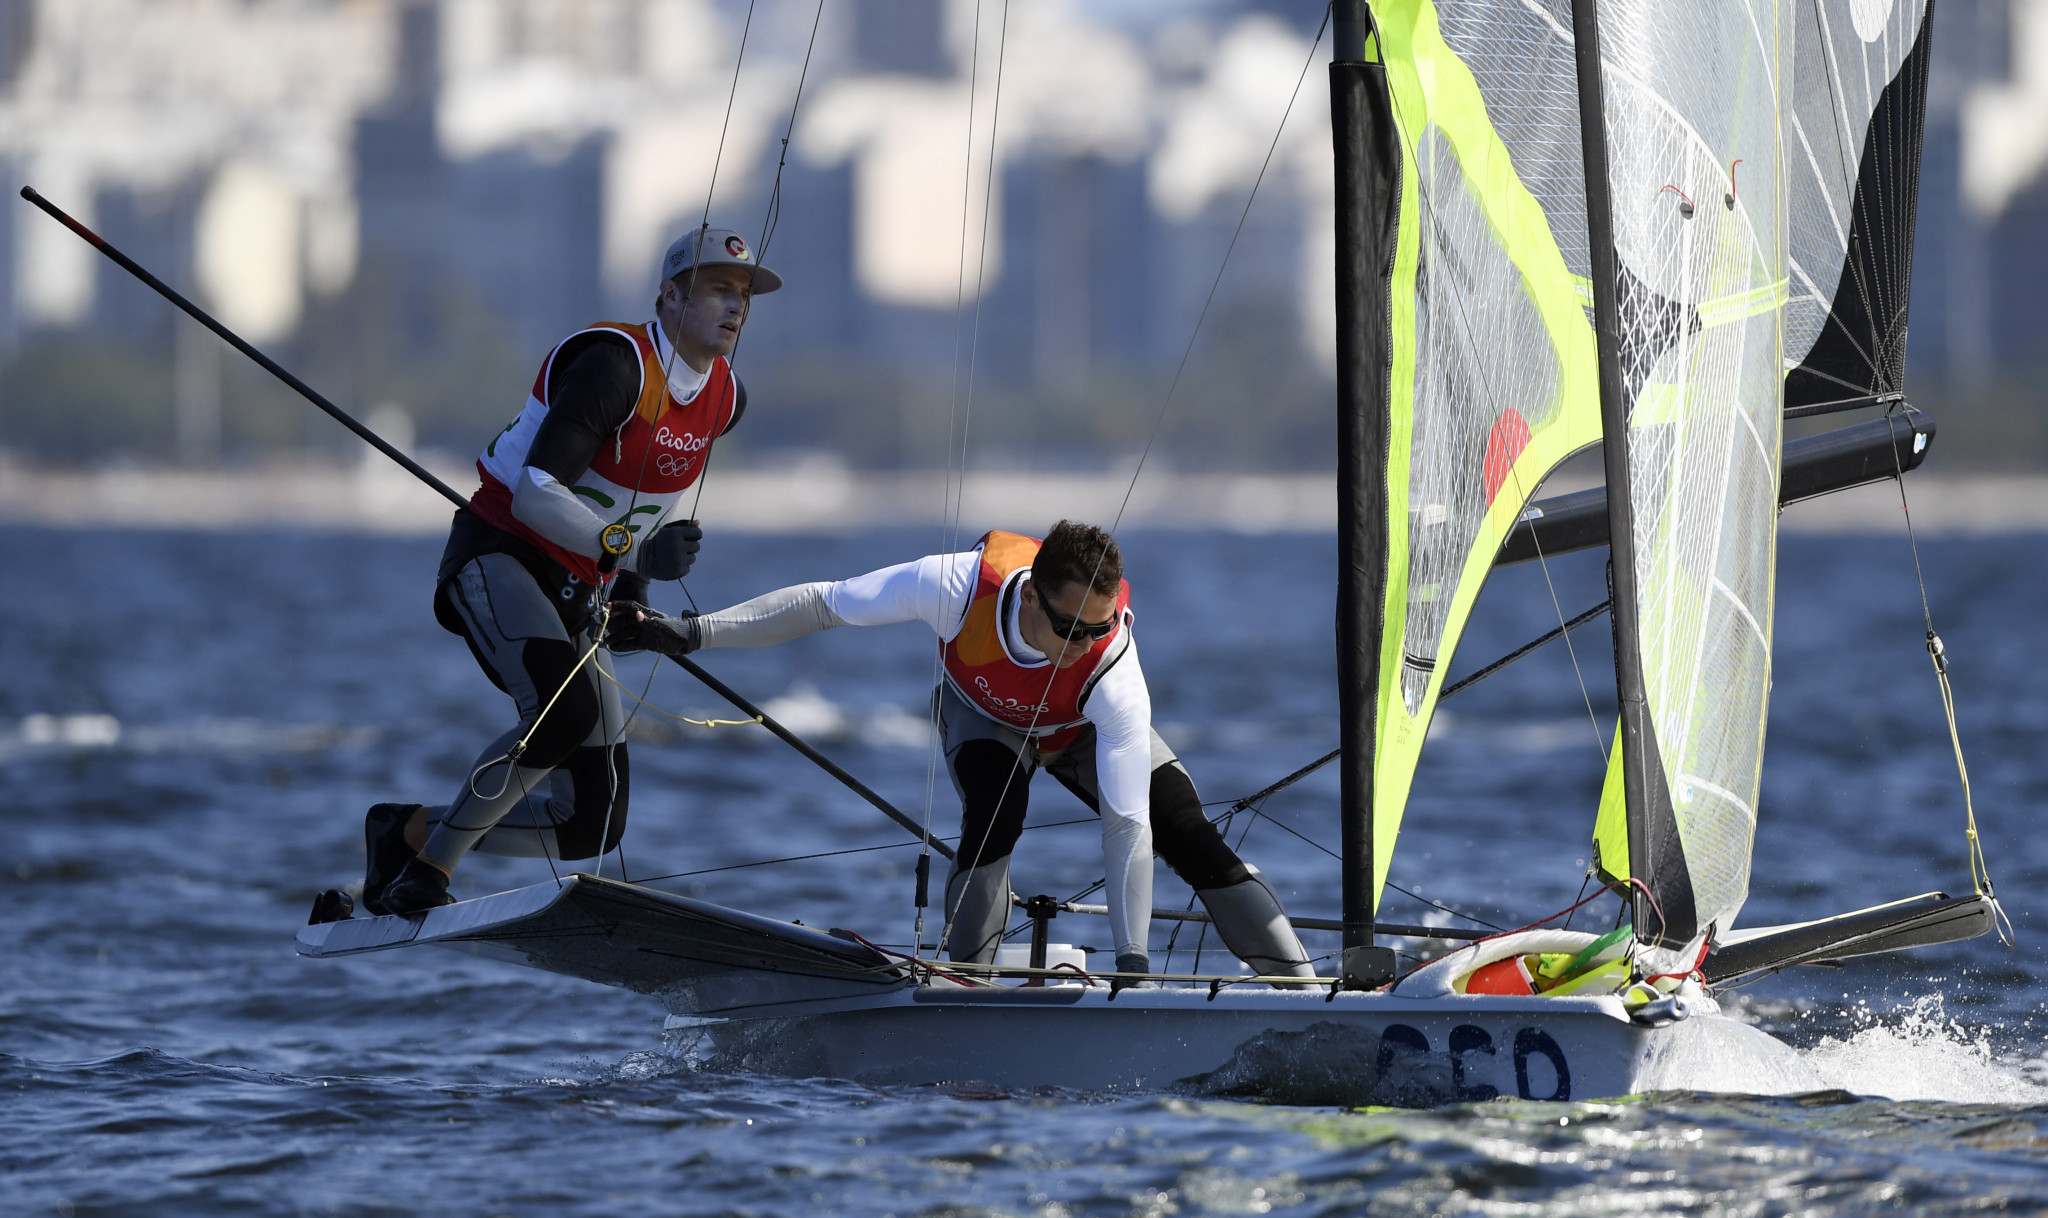 Heil and Ploessel take lead of 49er class at Sailing World Cup in Miami